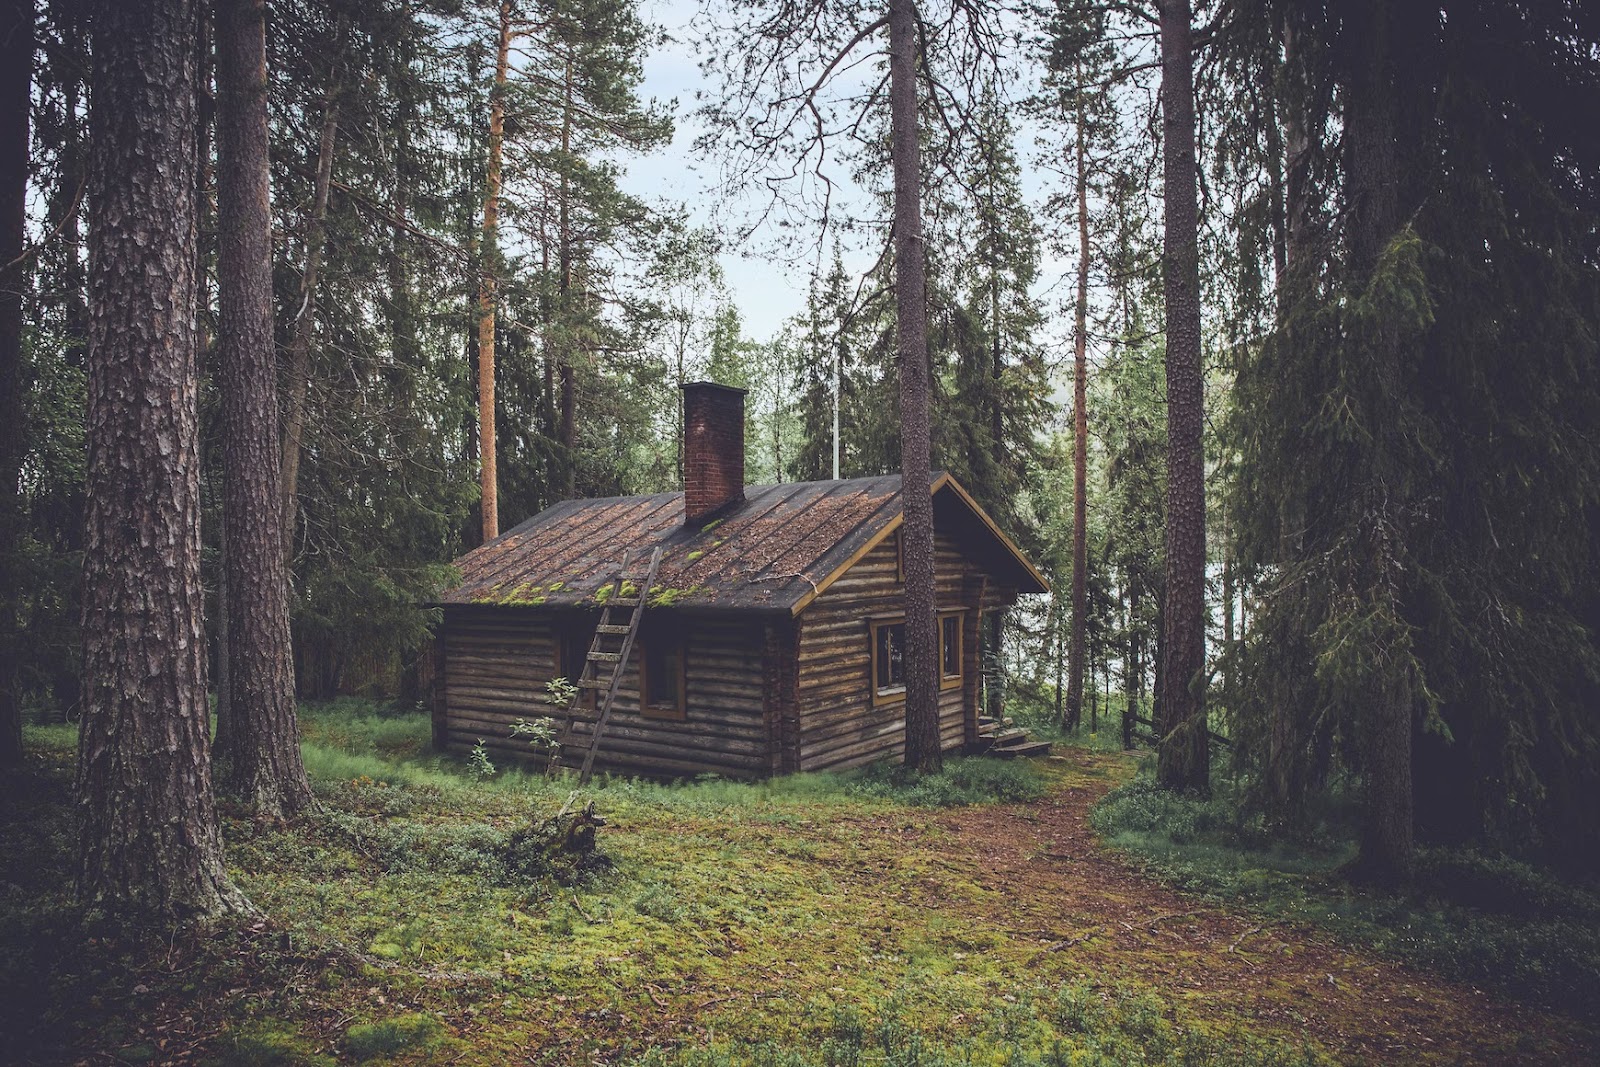 Cabin in the forest - What Is Off-Grid Living